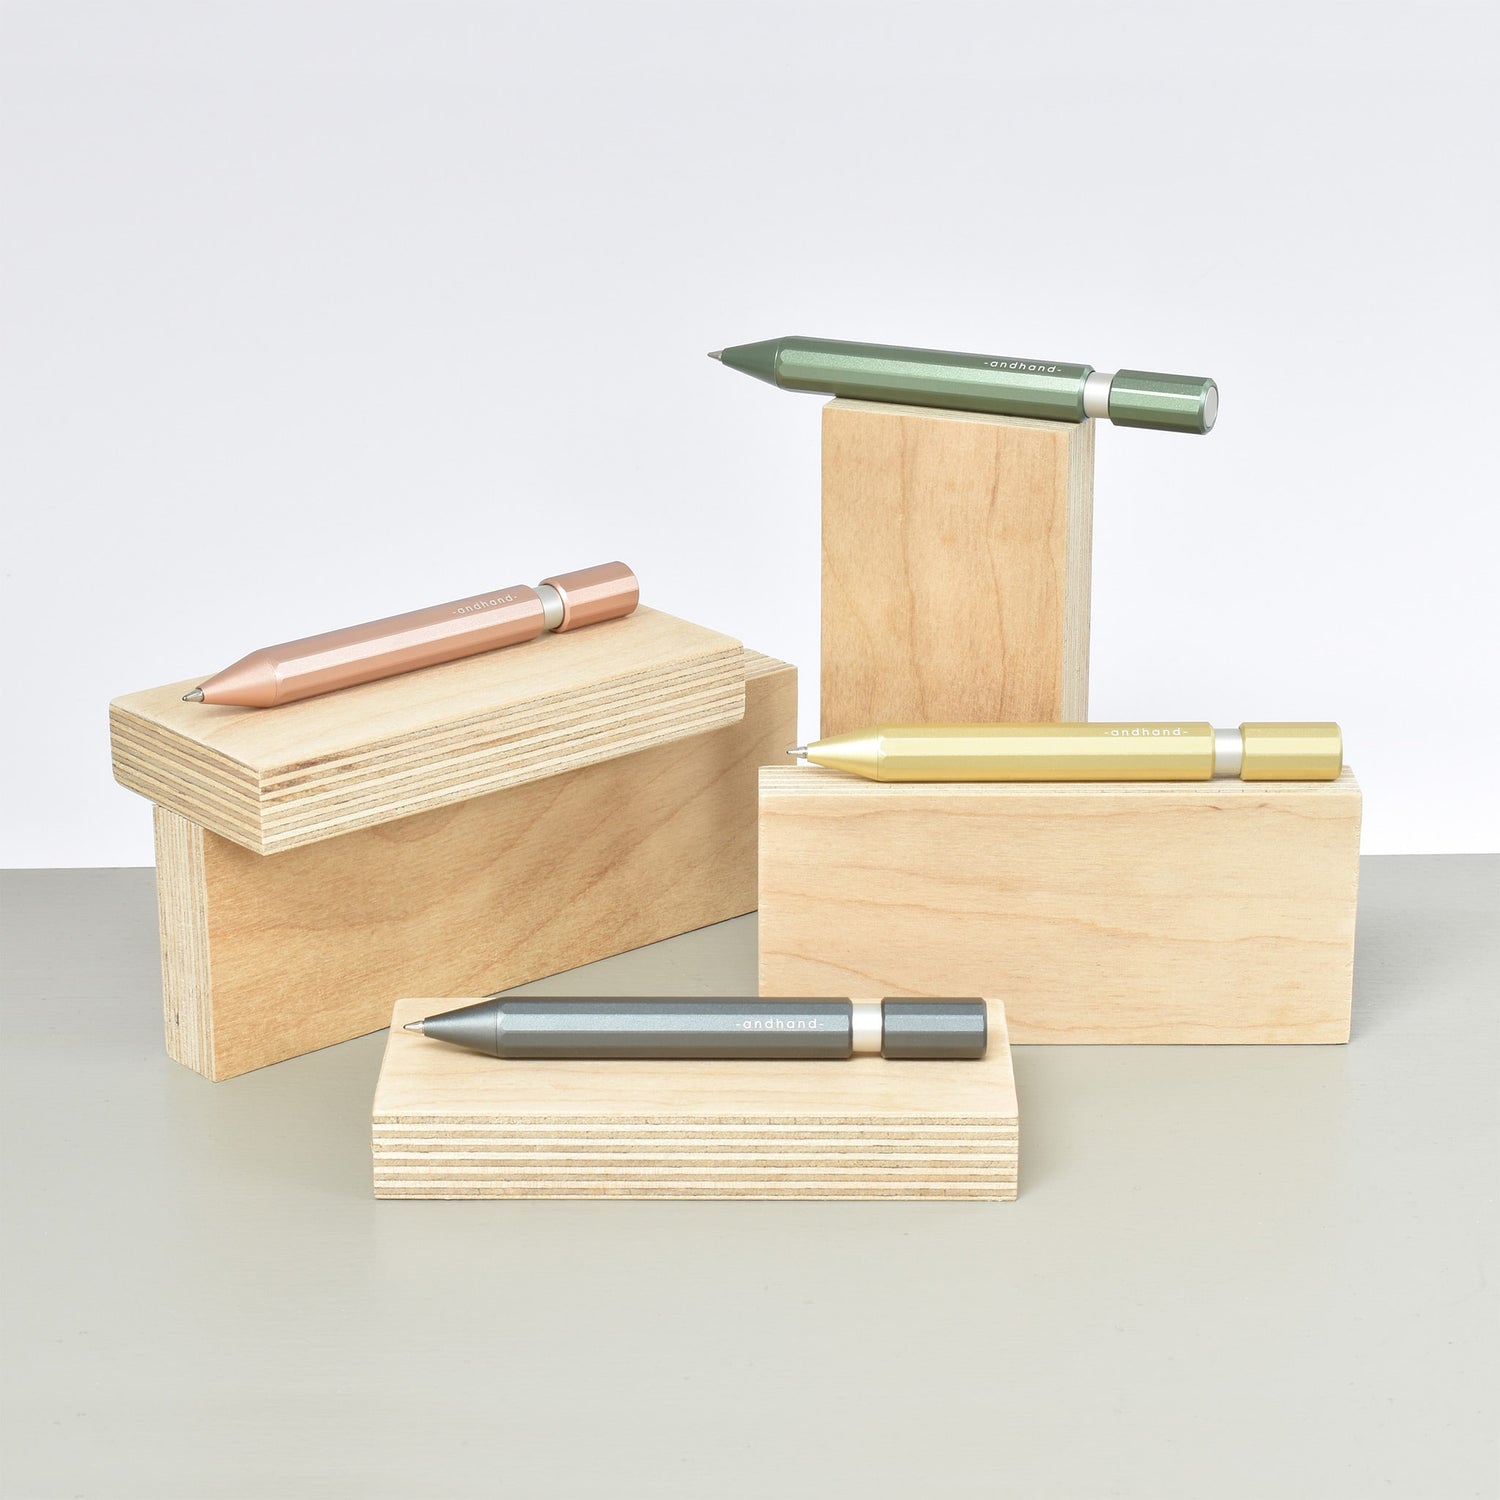 Aspect pen comes in Forest Green, Blush Pink, Gold Lustre and Slate grey anodized finishes